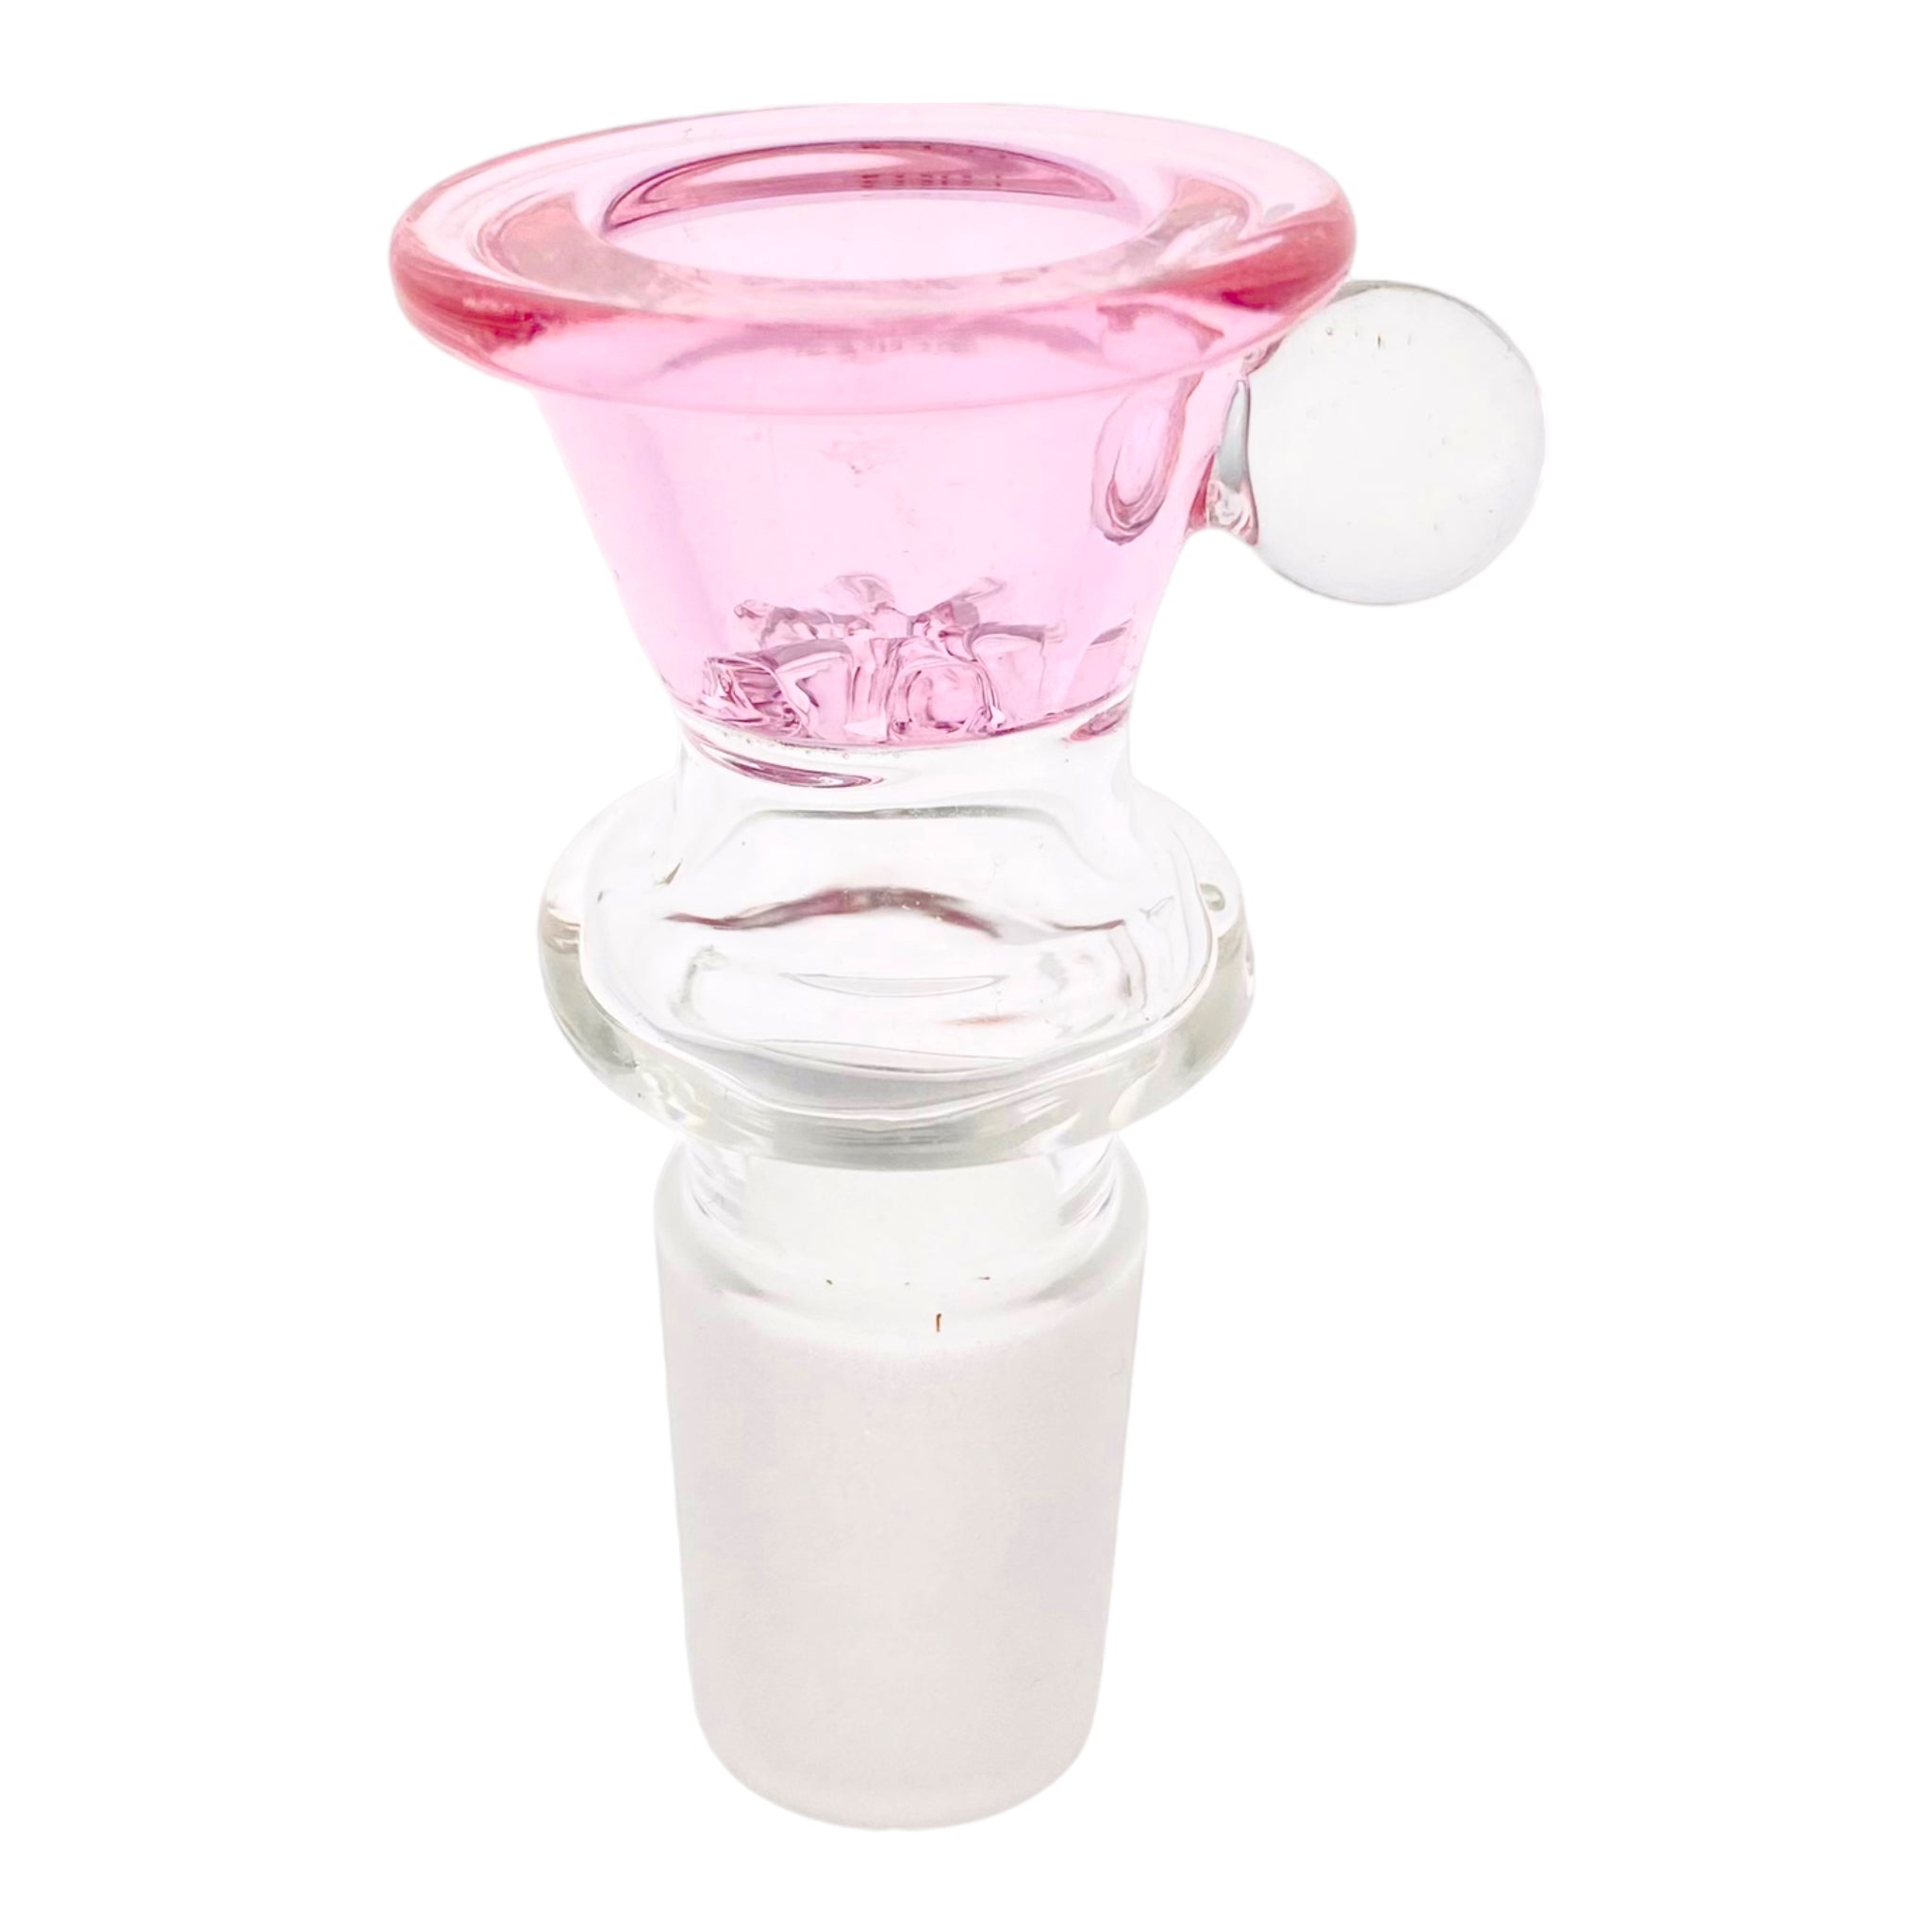 18mm Flower Bowl - Pink Funnel With Built In Glass Screen